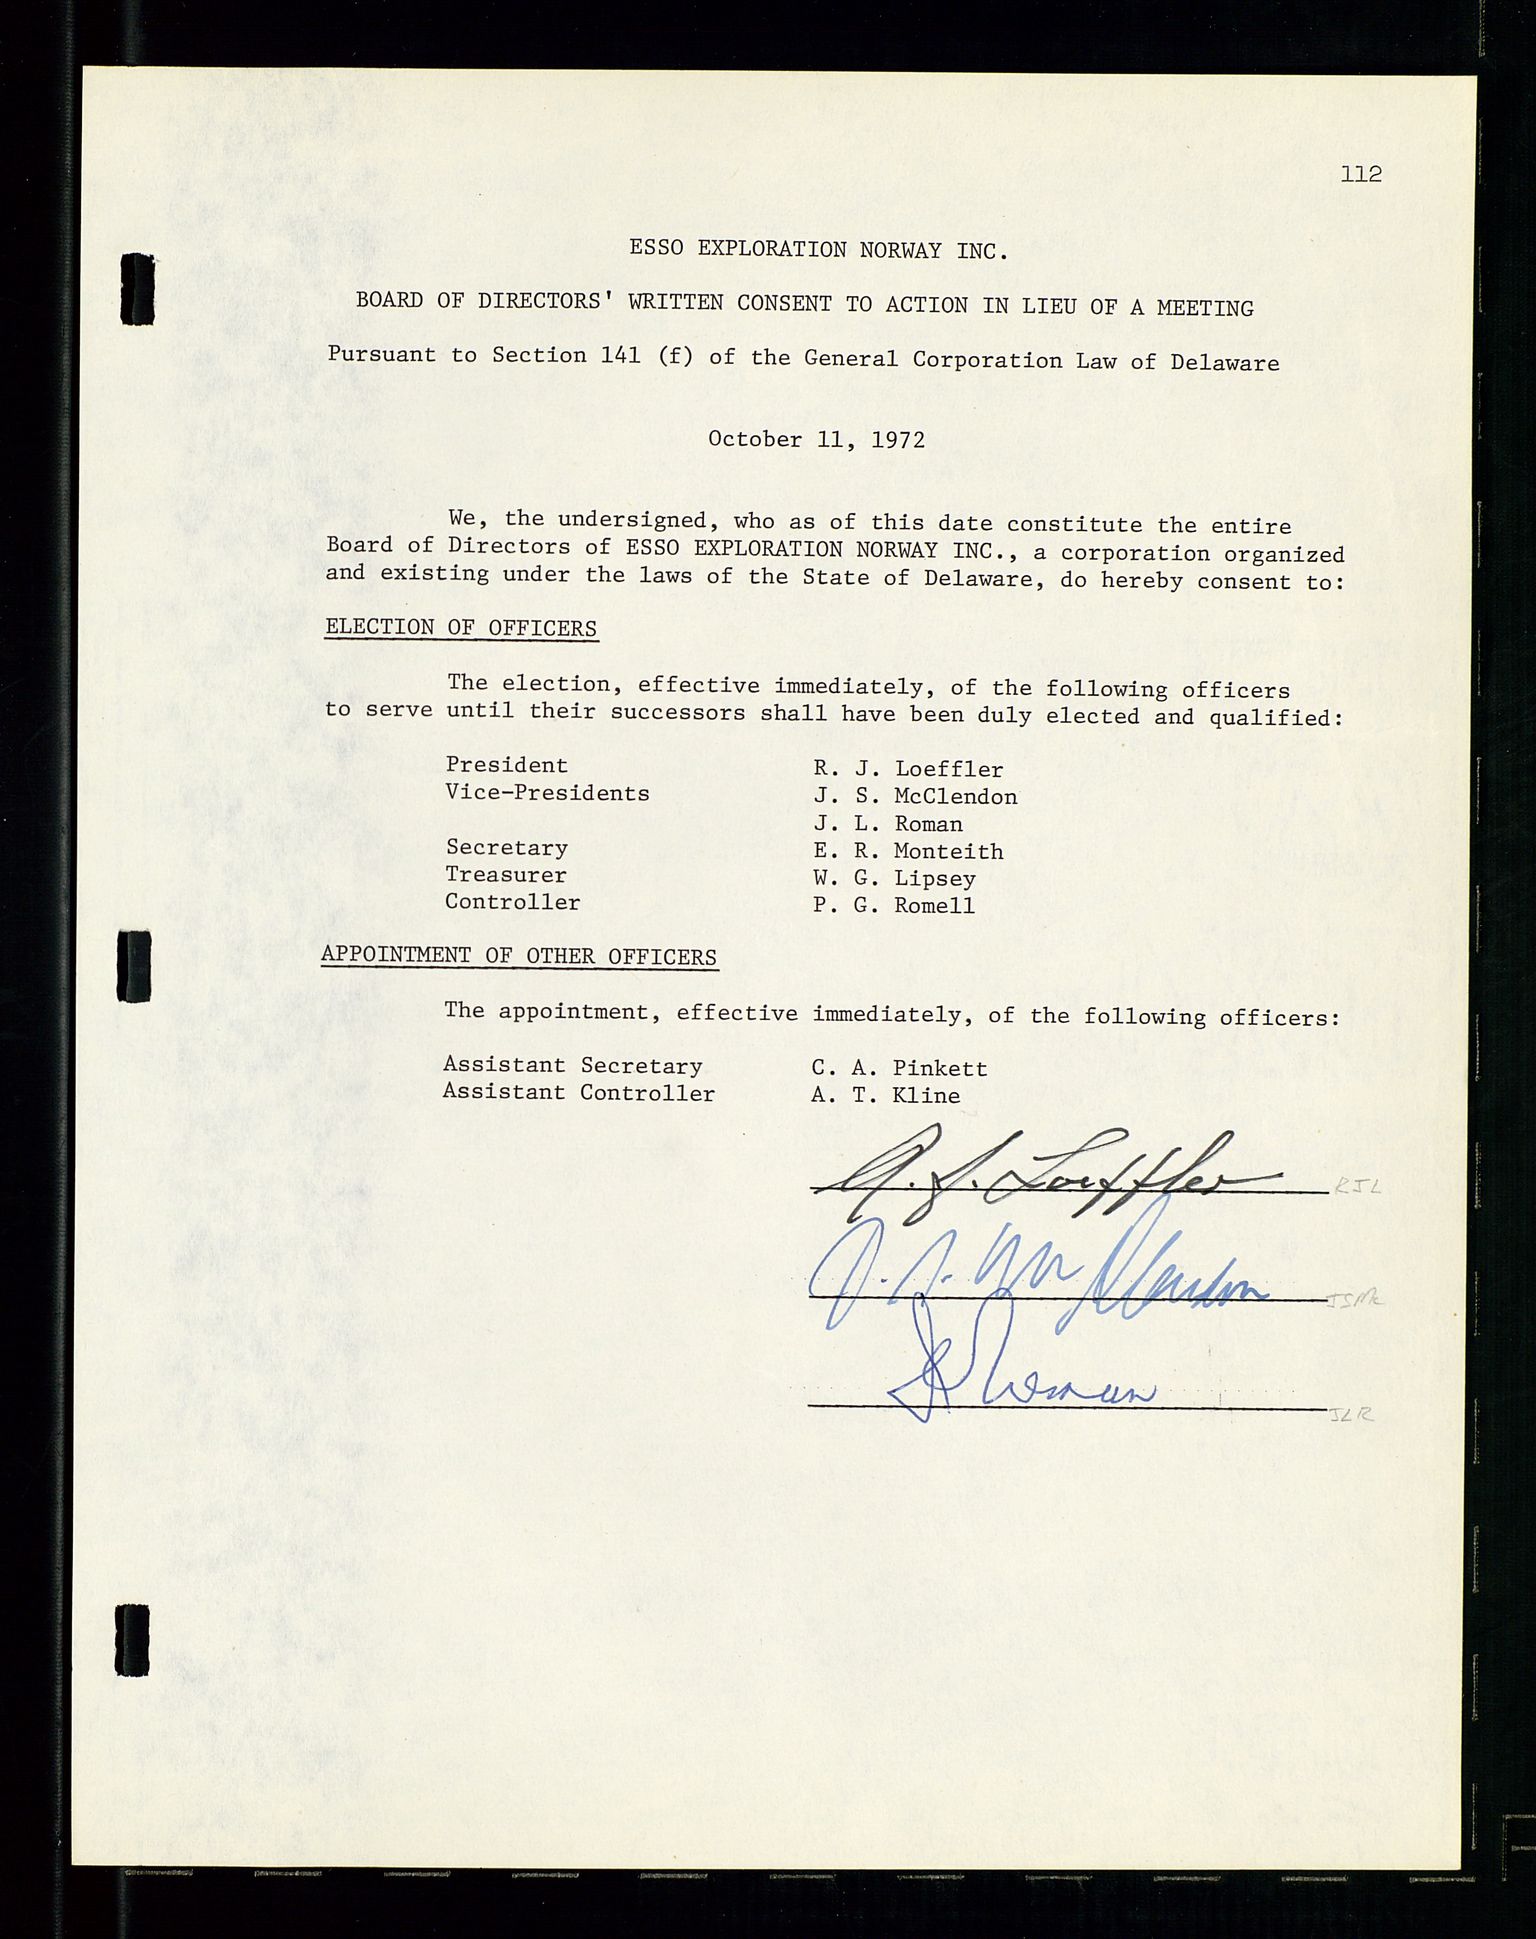 Pa 1512 - Esso Exploration and Production Norway Inc., SAST/A-101917/A/Aa/L0001/0001: Styredokumenter / Corporate records, By-Laws, Board meeting minutes, Incorporations, 1965-1975, p. 112